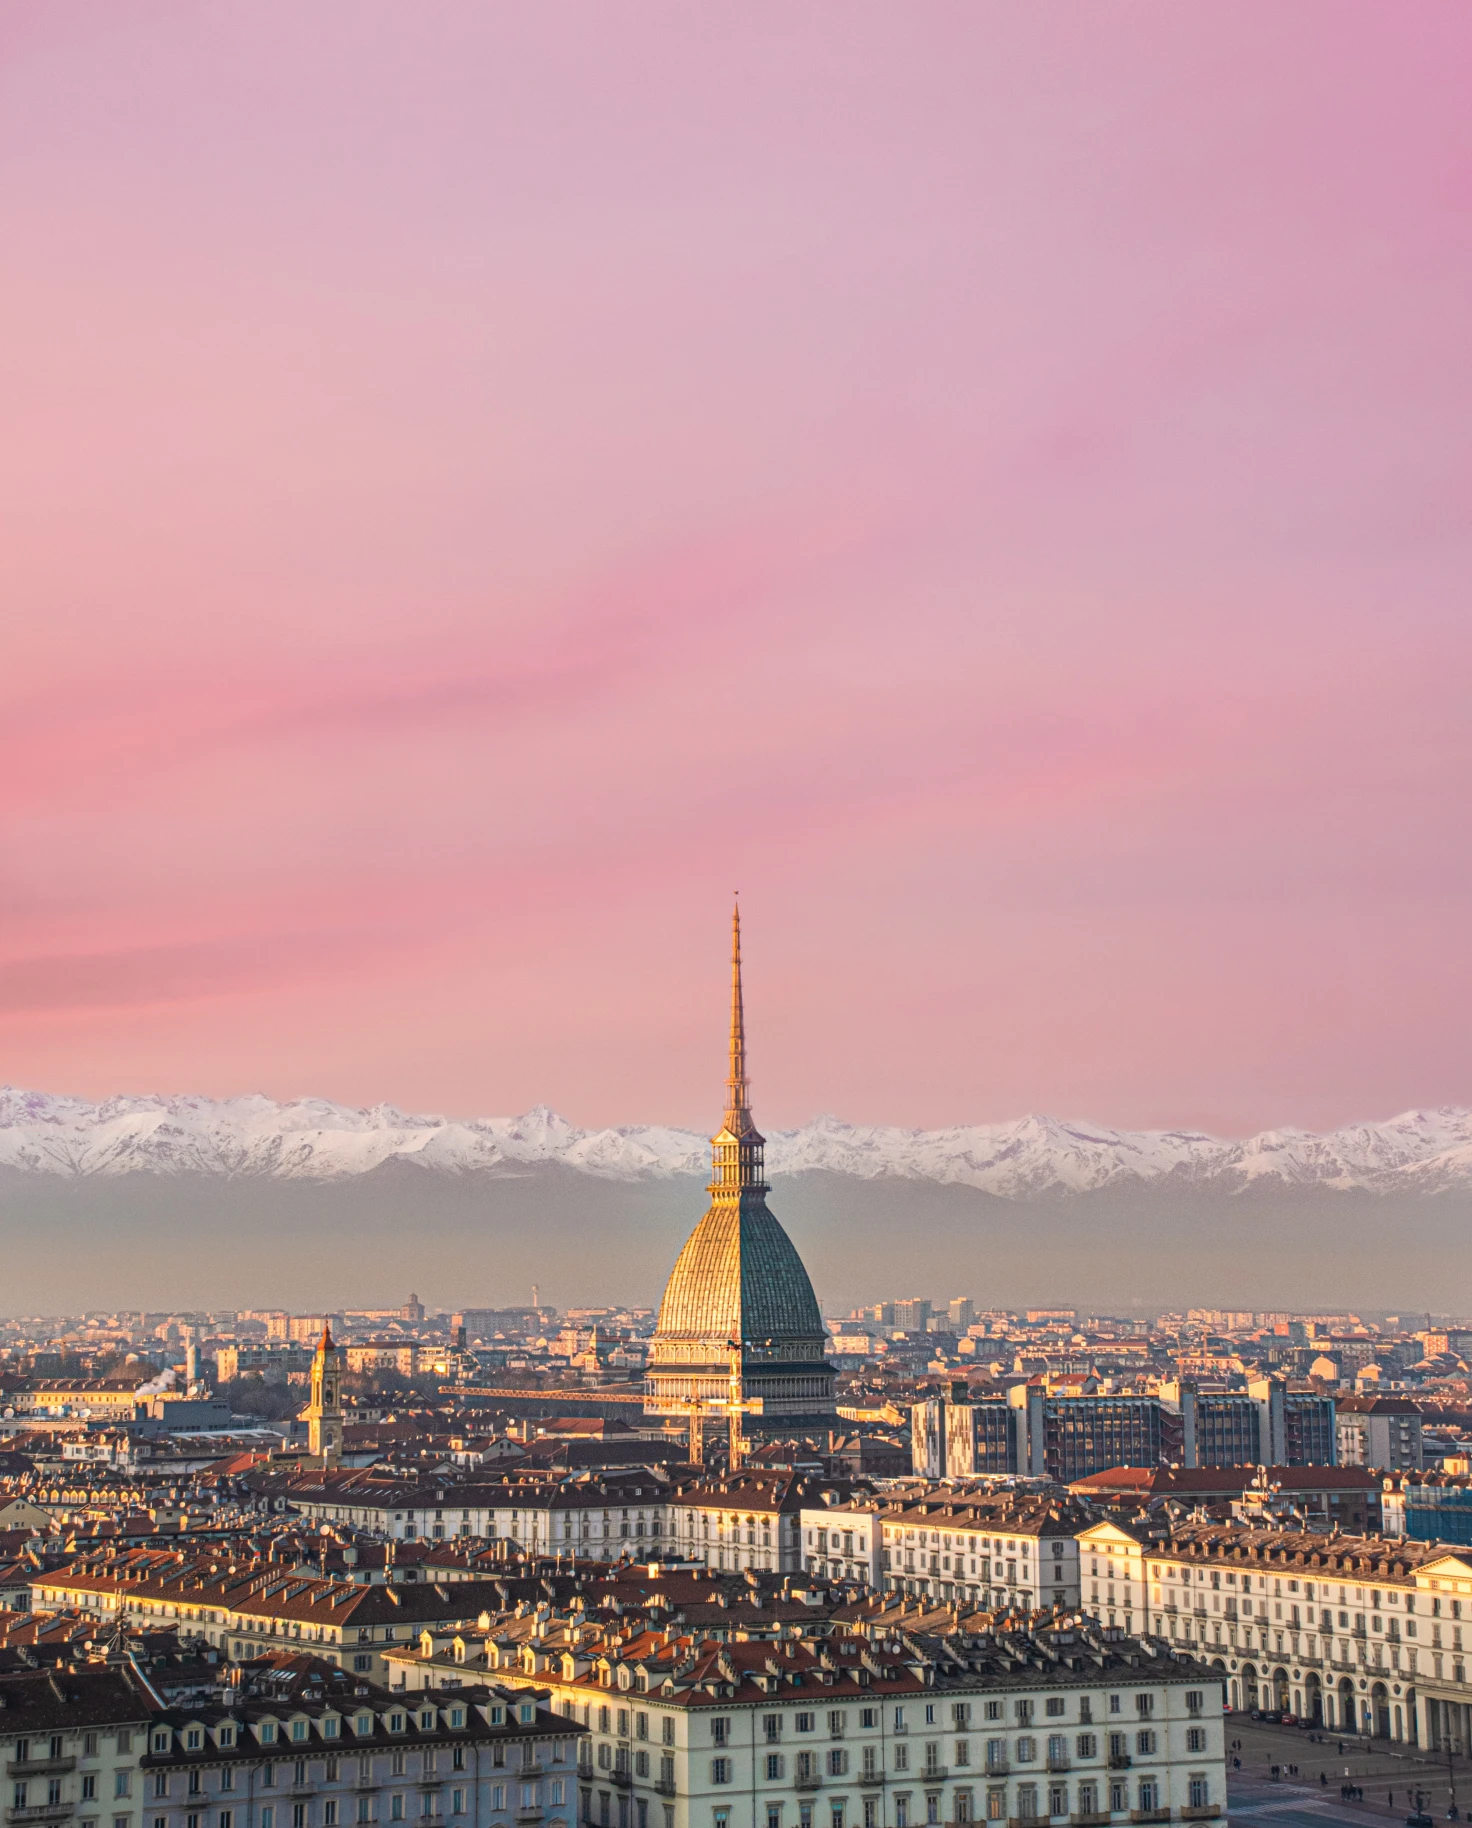 View of Torino, Italy with a pink sky